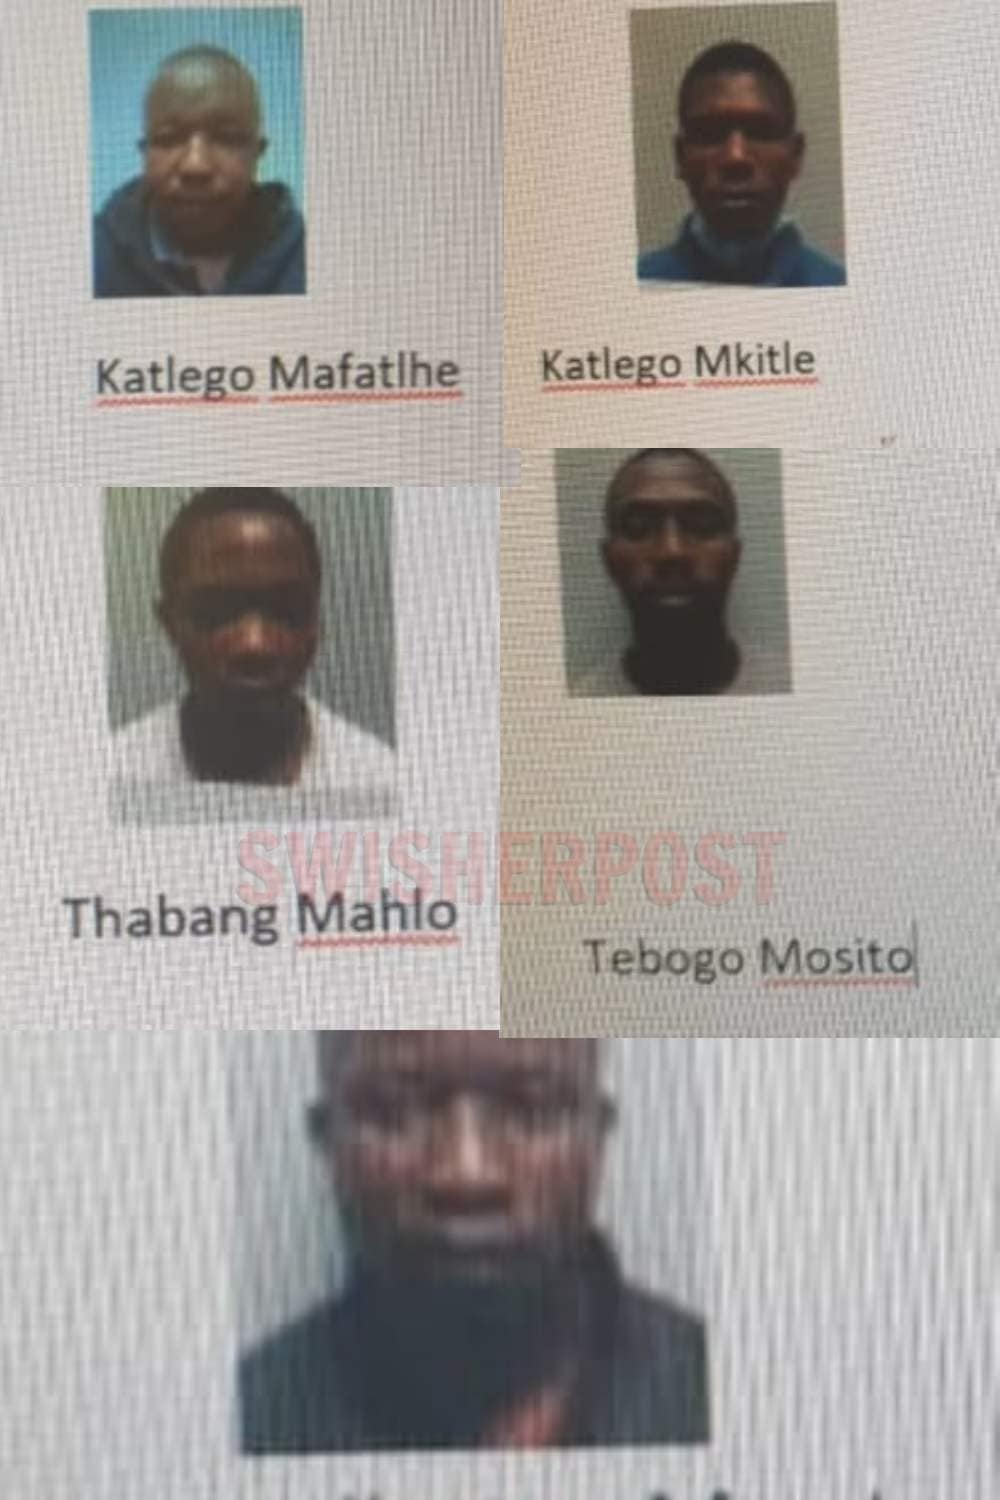 North West prison break suspects fugitives on the run